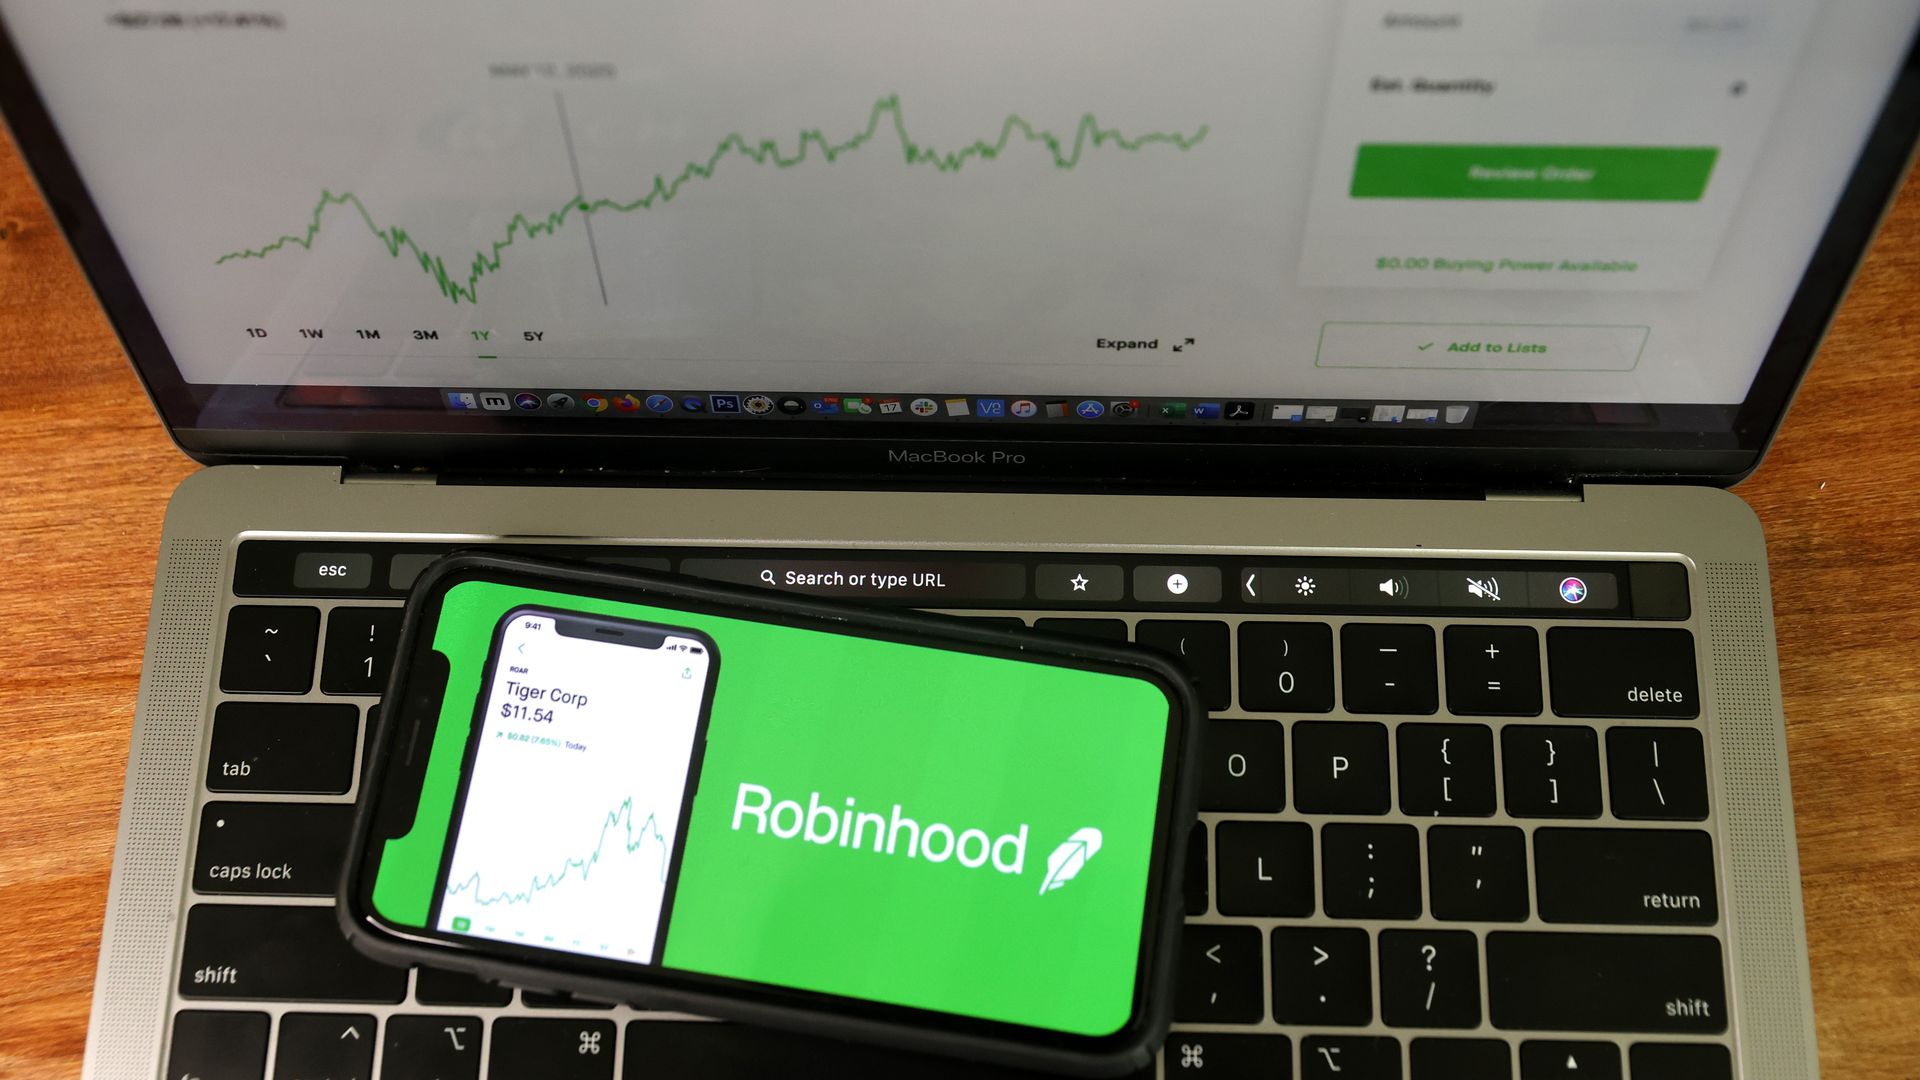 A smartphone showing the RobinHood app is seen on the keyboard of a laptop.